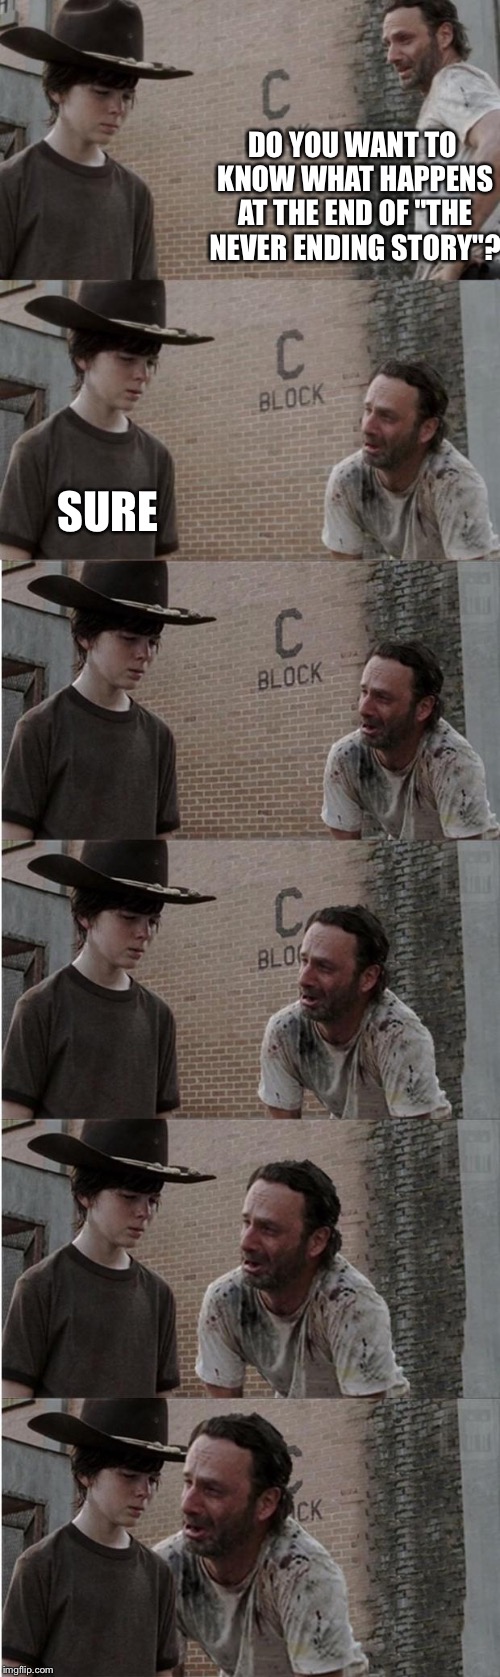 Rick and Carl Longer |  SURE; DO YOU WANT TO KNOW WHAT HAPPENS AT THE END OF "THE NEVER ENDING STORY"? | image tagged in memes,rick and carl longer | made w/ Imgflip meme maker